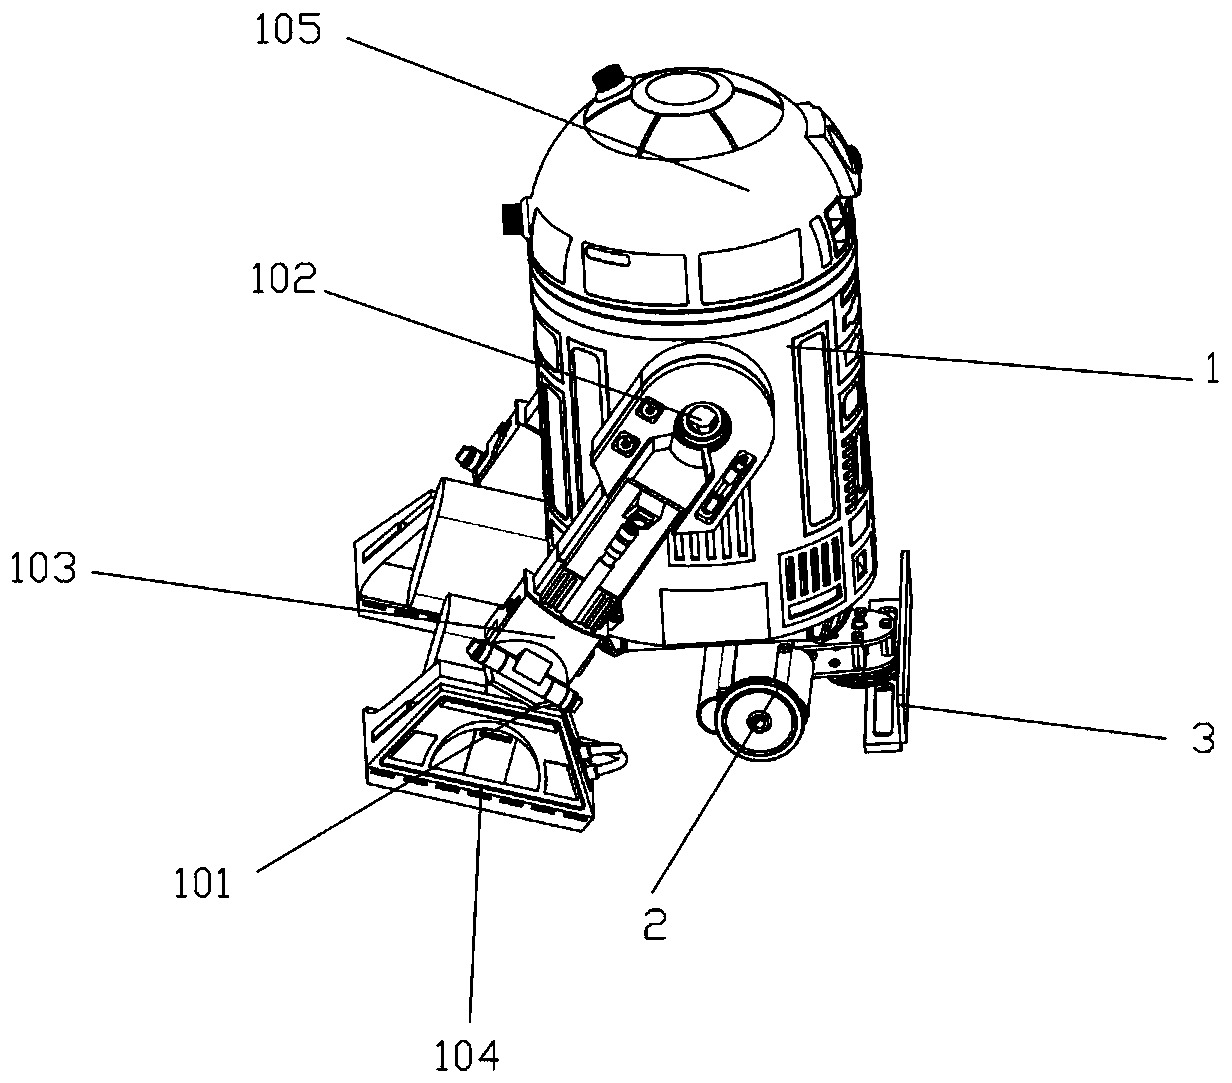 Intelligent stair cleaning robot and working method thereof